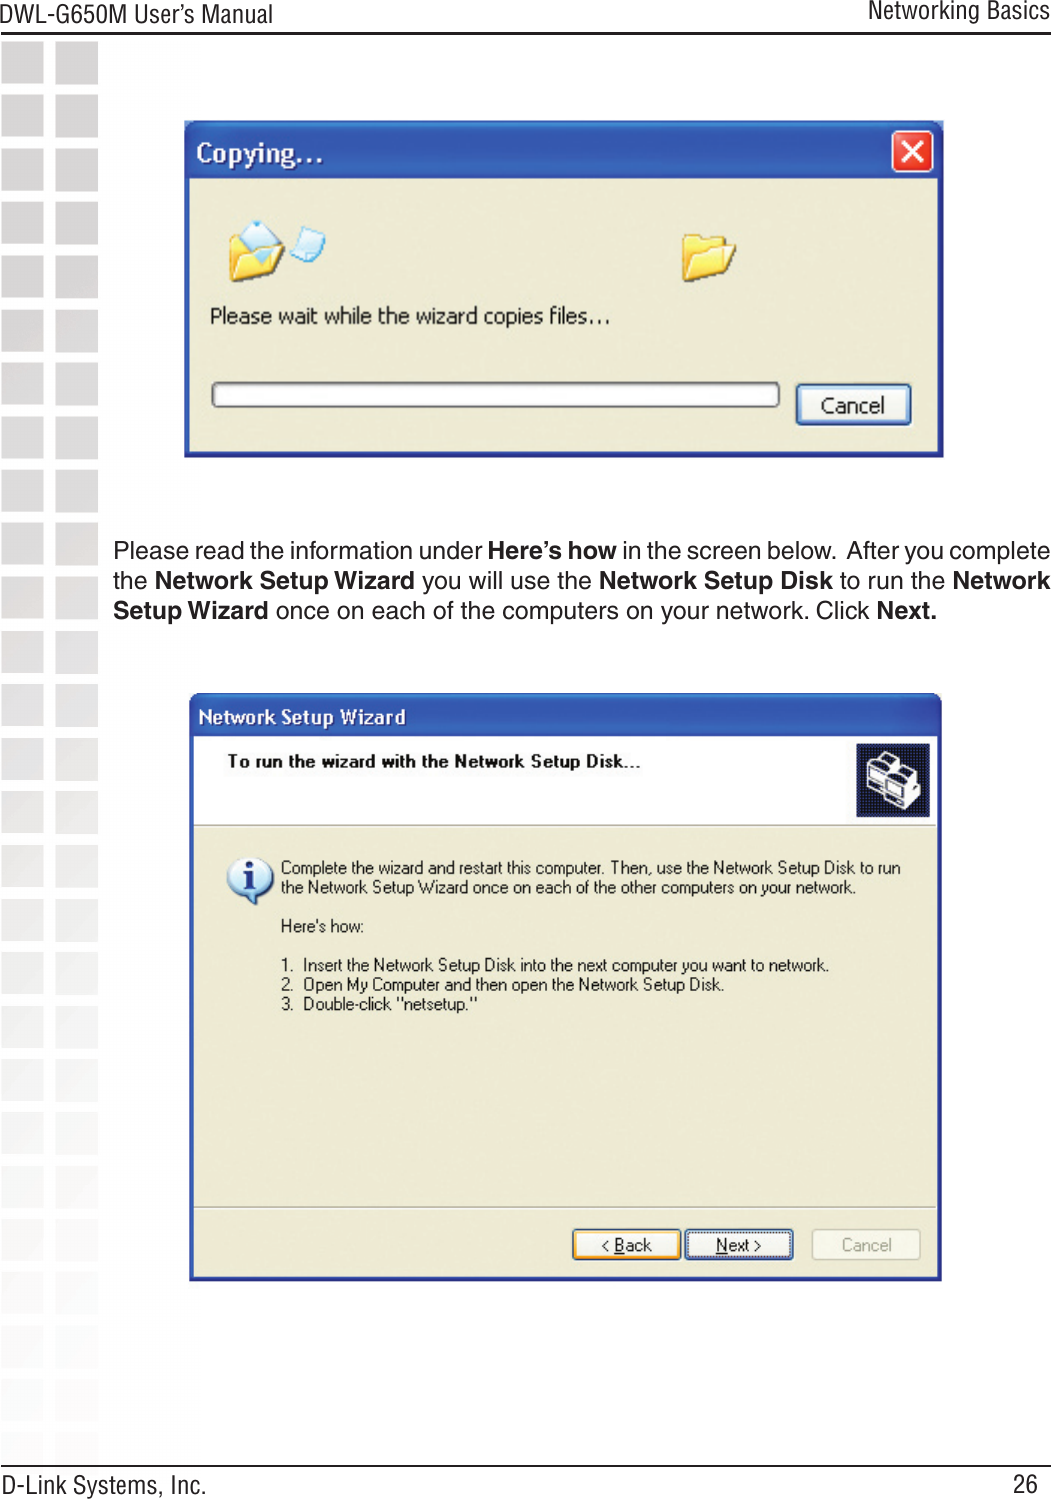 26DWL-G650M User’s Manual D-Link Systems, Inc.Networking BasicsPlease read the information under Here’s how in the screen below.  After you complete the Network Setup Wizard you will use the Network Setup Disk to run the Network Setup Wizard once on each of the computers on your network. Click Next. 